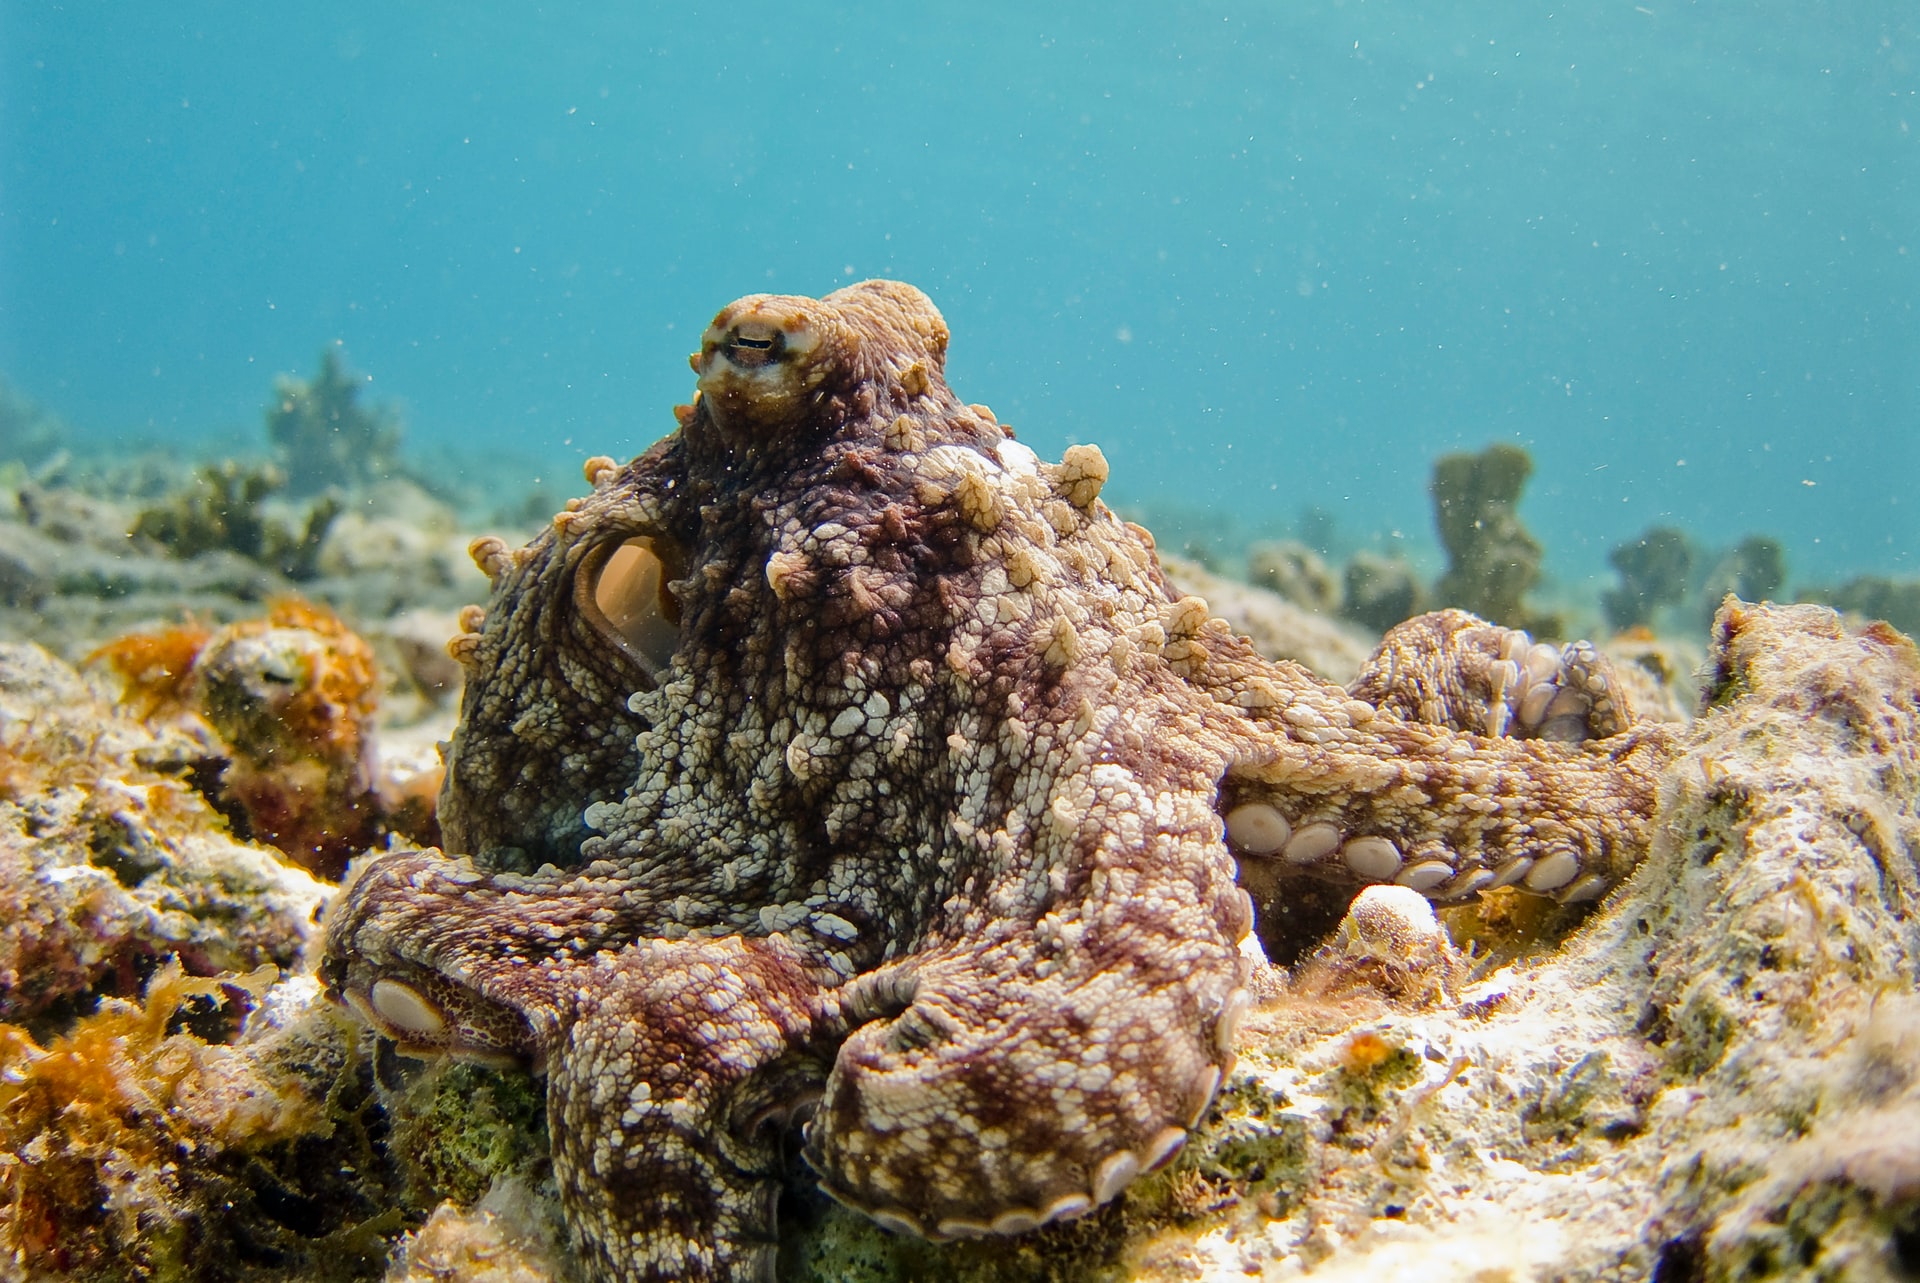 Brown octopus with full camouflage.